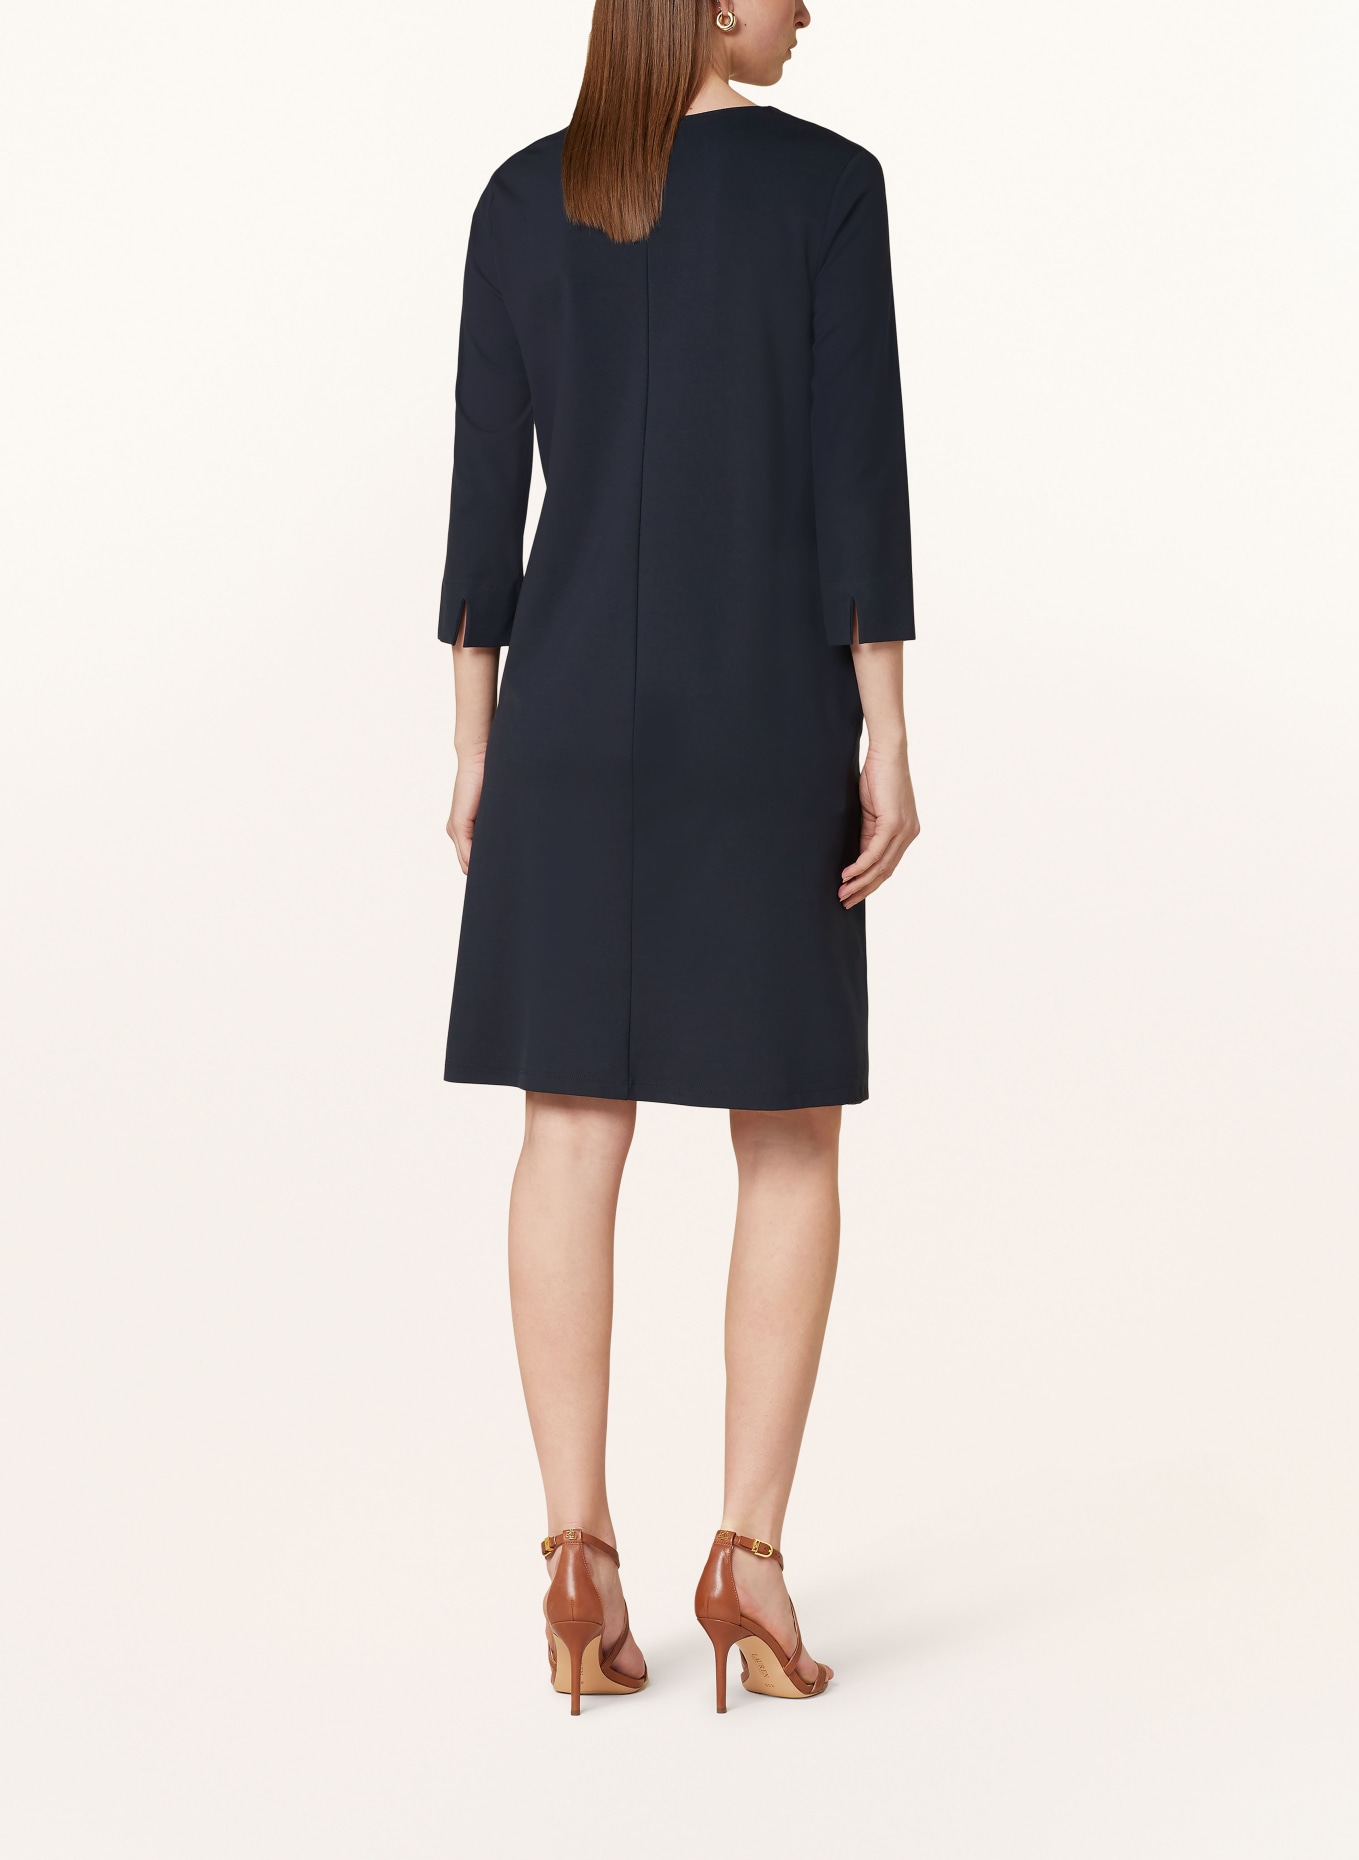 ELENA MIRO Jersey dress with 3/4 sleeves, Color: DARK BLUE (Image 3)